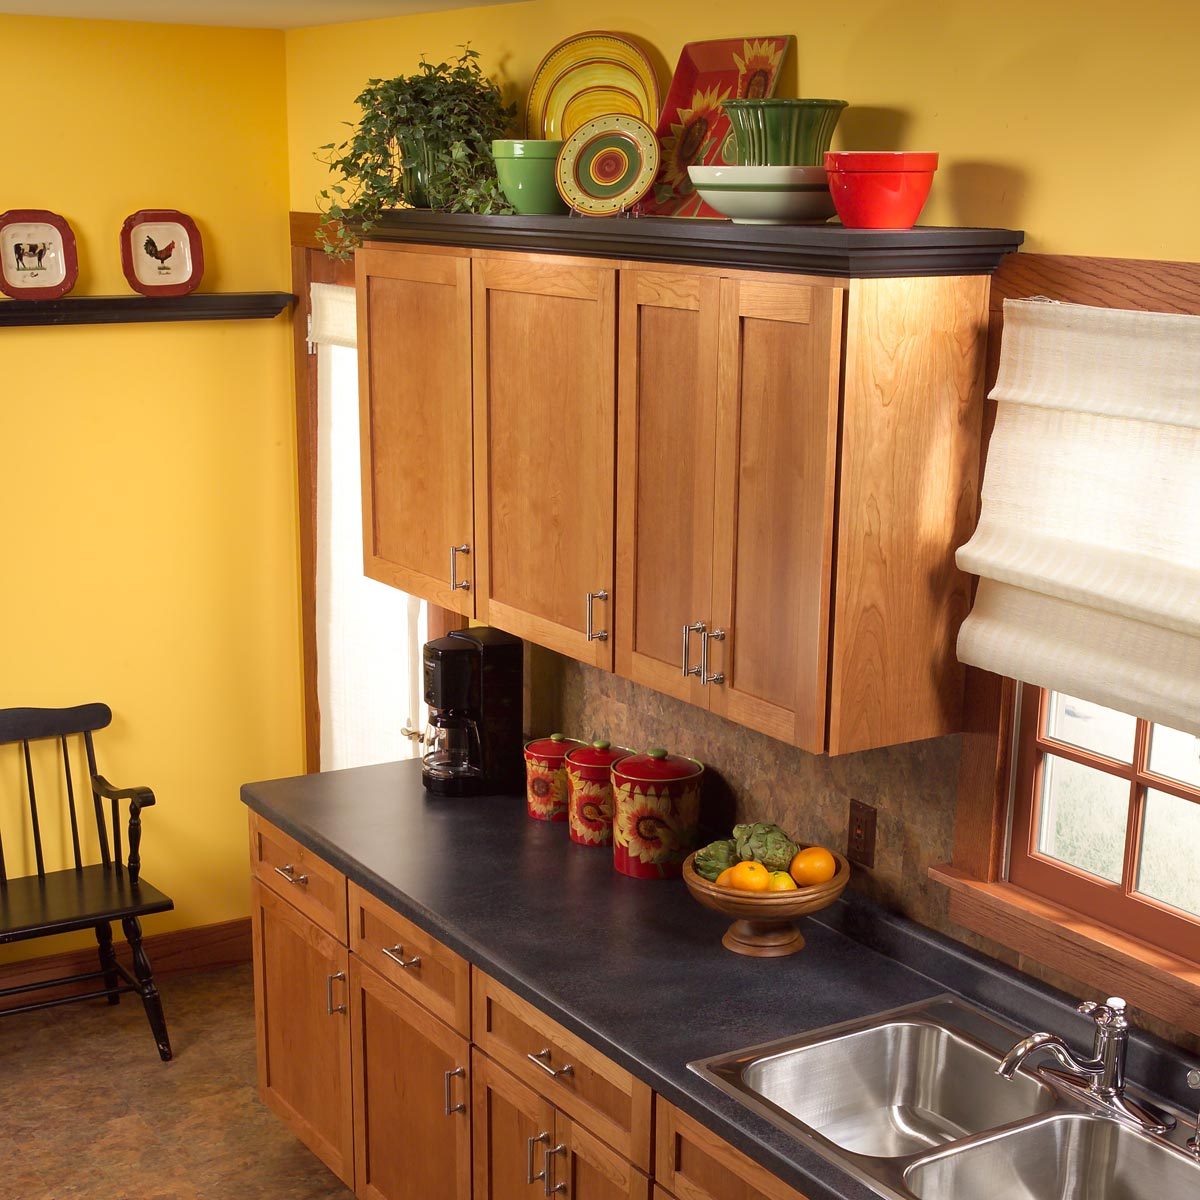 How To Add Shelves Above Kitchen Cabinets Family Handyman